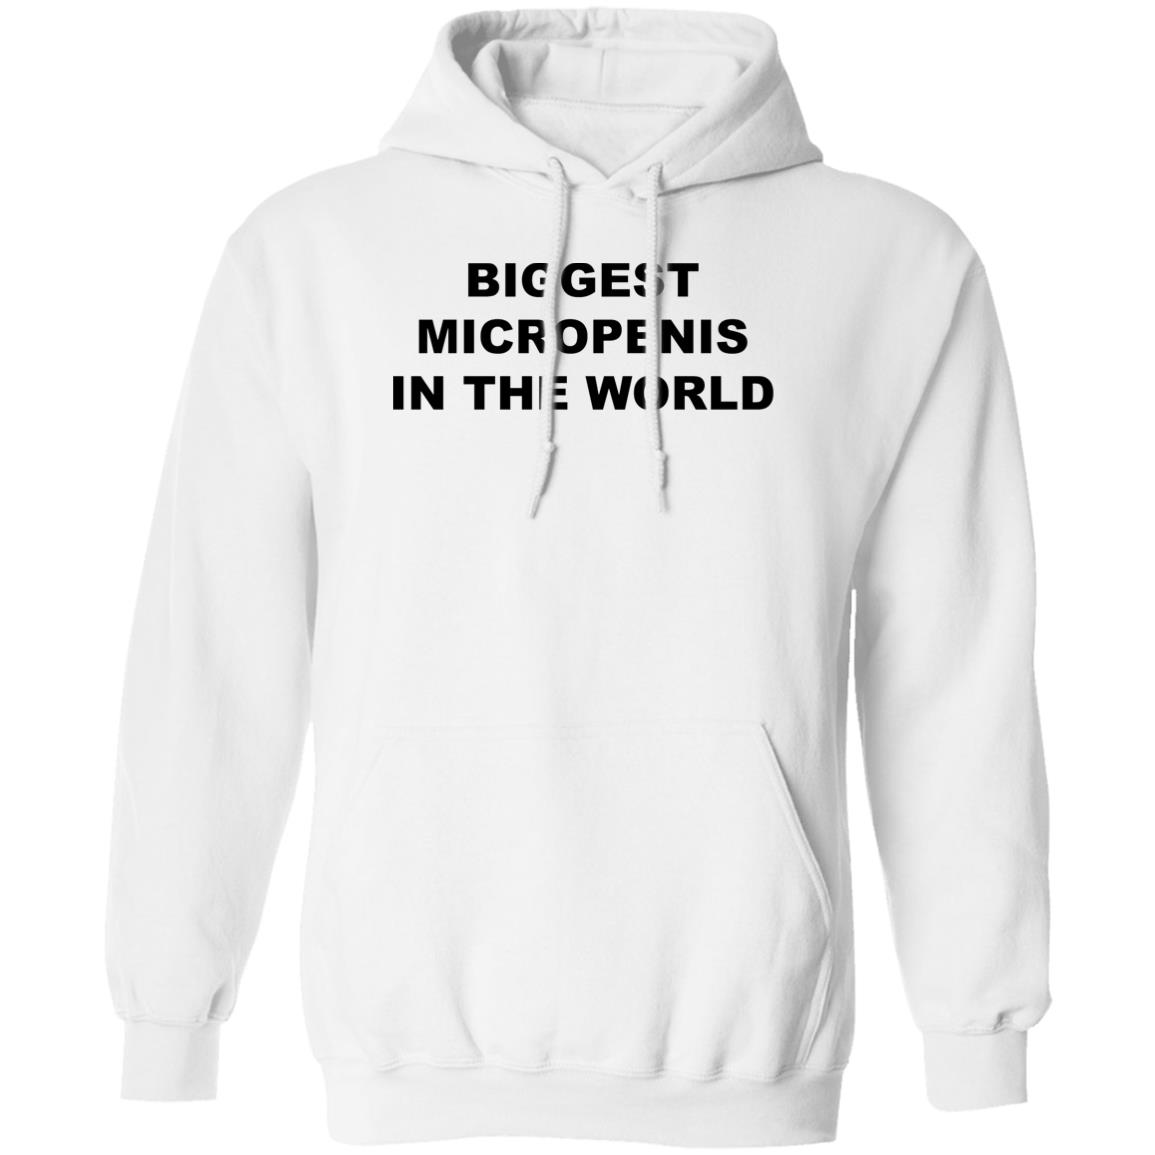 Biggest Micropenis In The World Shirt 1